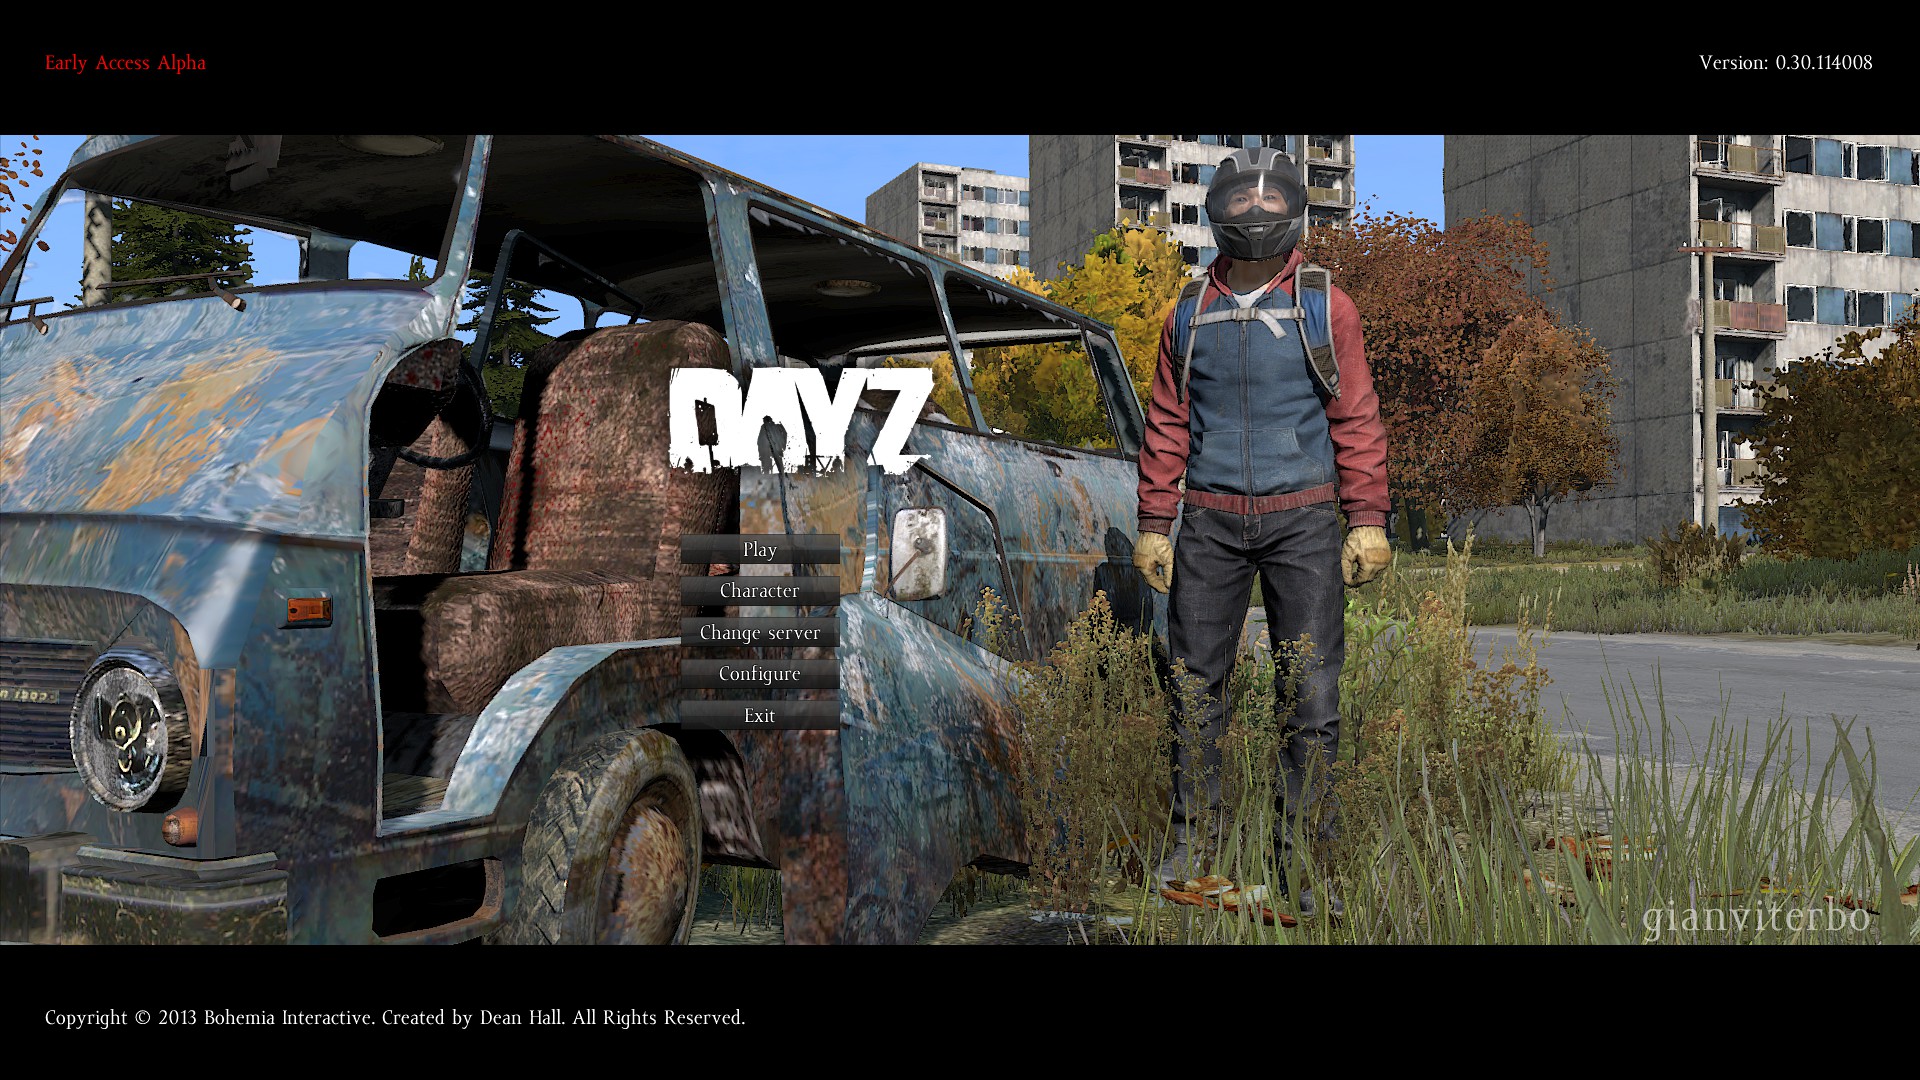 DayZ Standalone Sustains Position as Top Game on Steam, Purchased by 1M Gamers